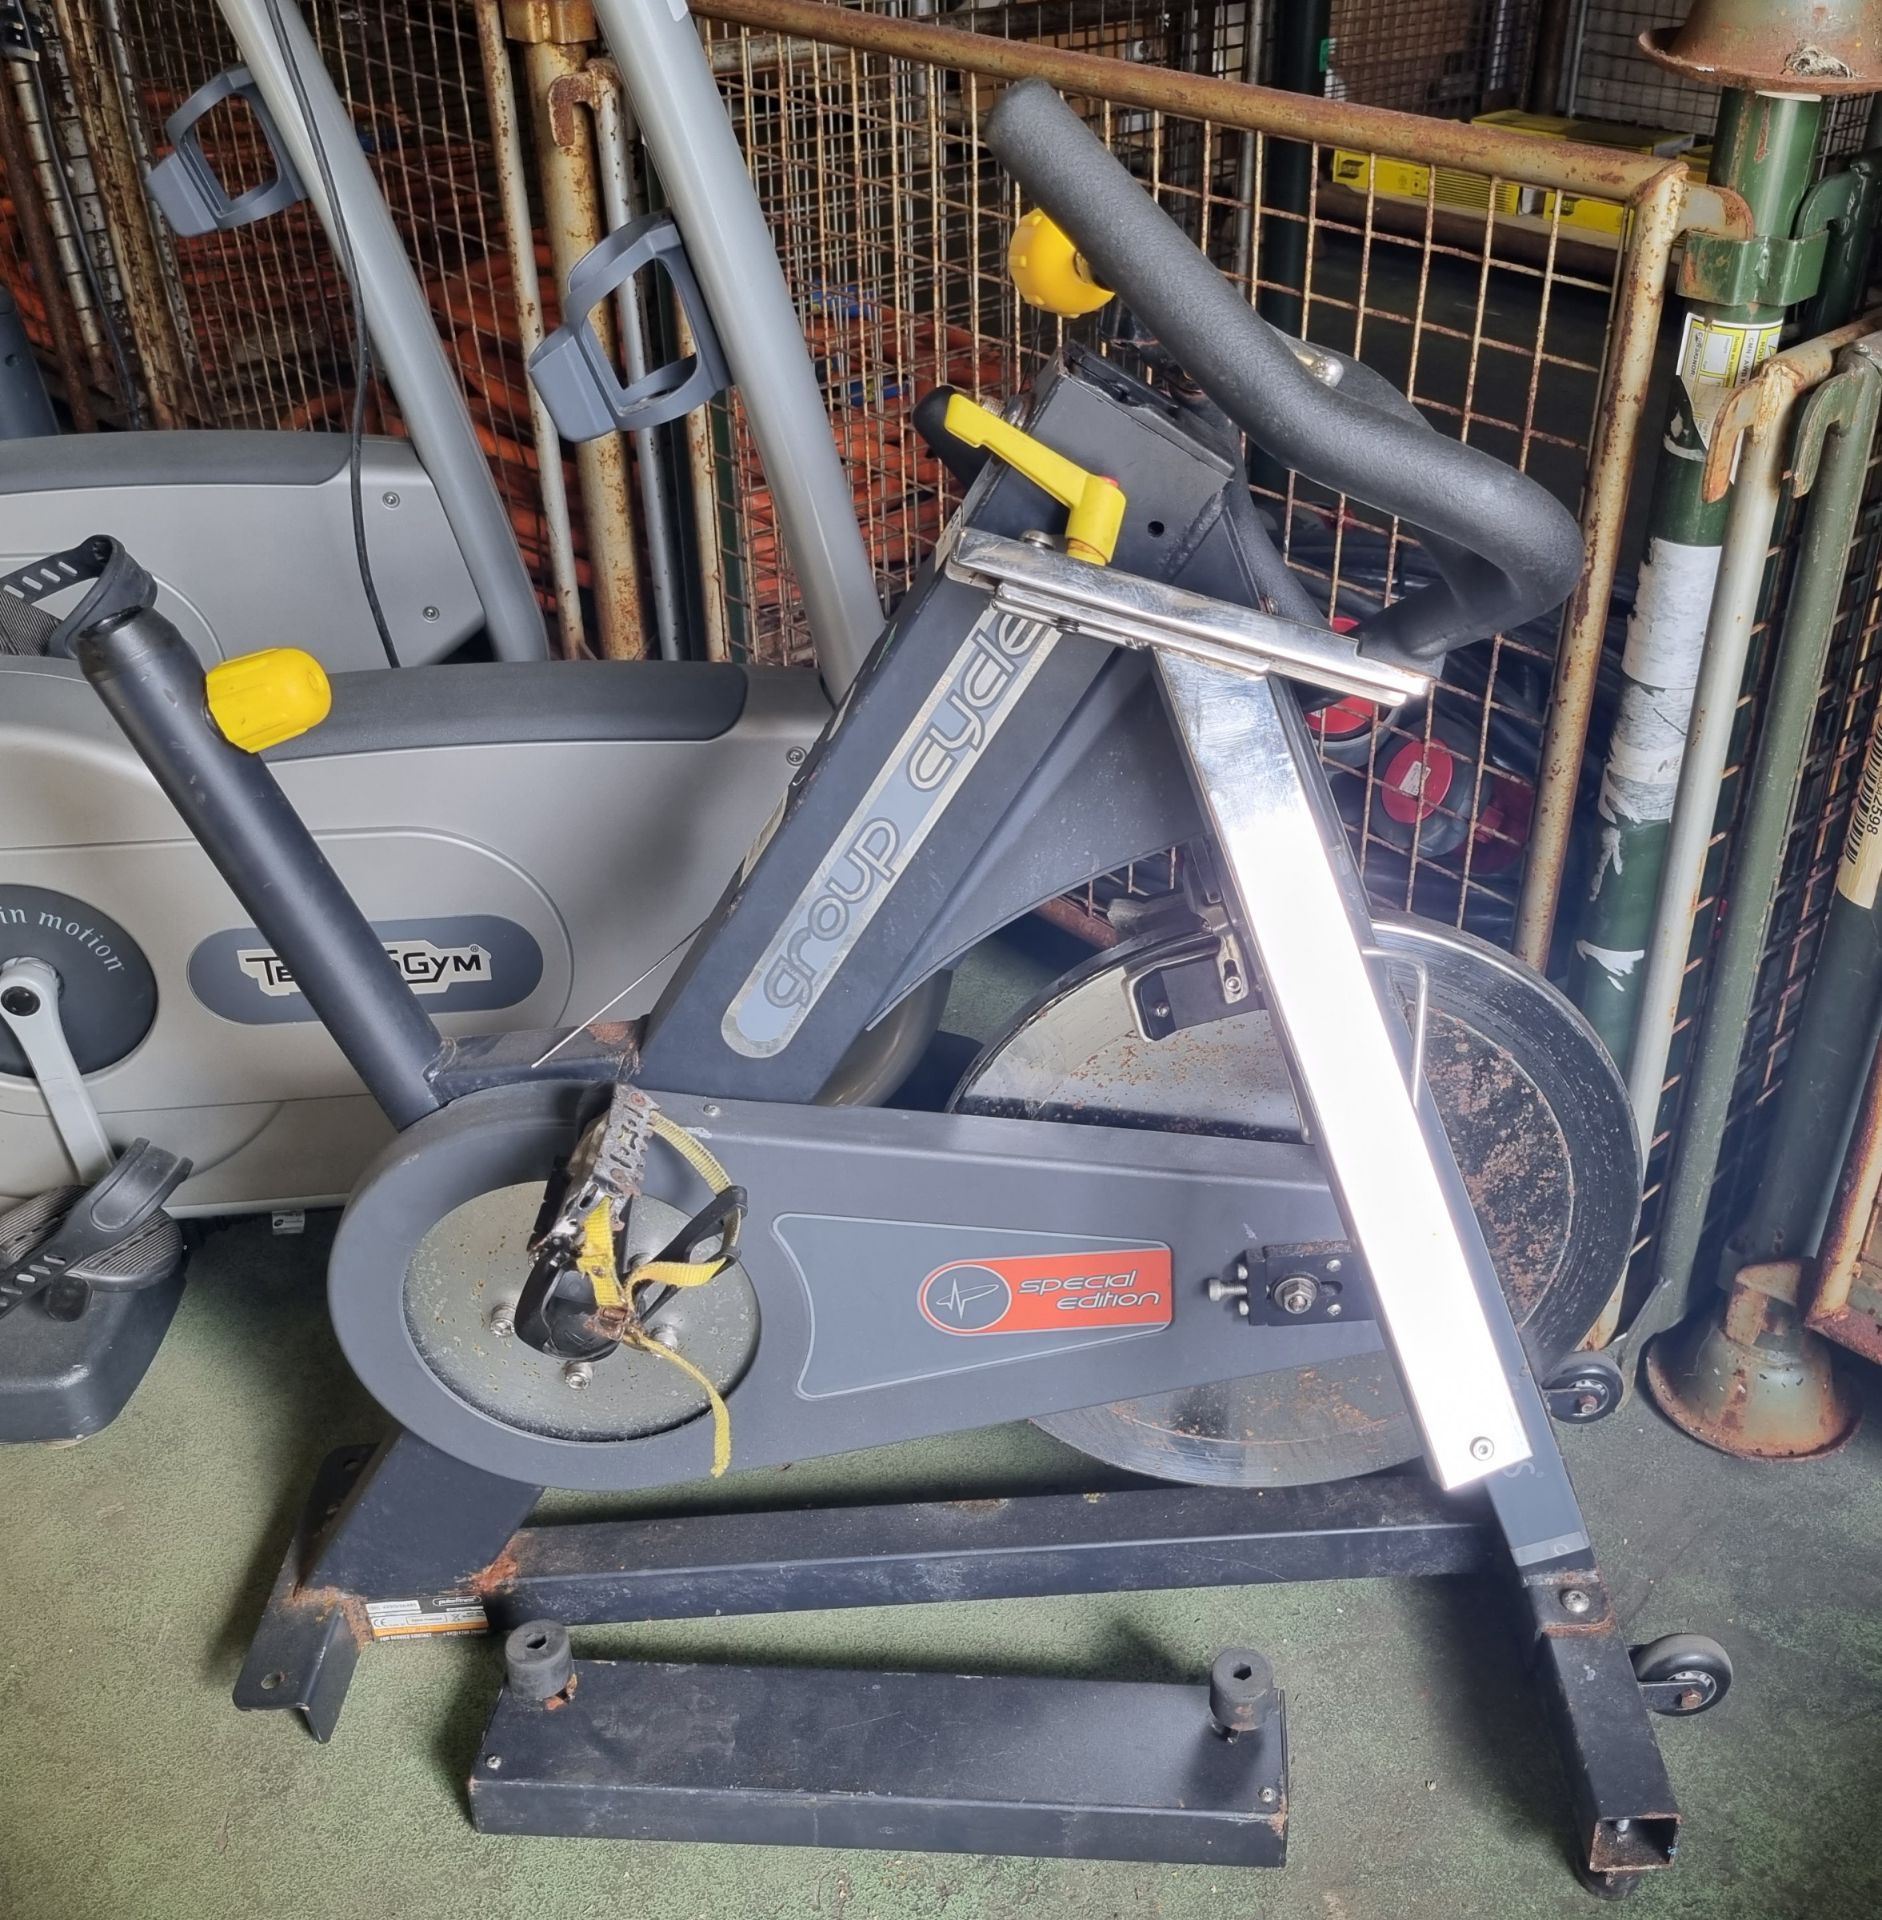 Pulse fitness group cycle Spin bike L 100 x W 50 x H 120 cm - AS SPARES OR REPAIRS